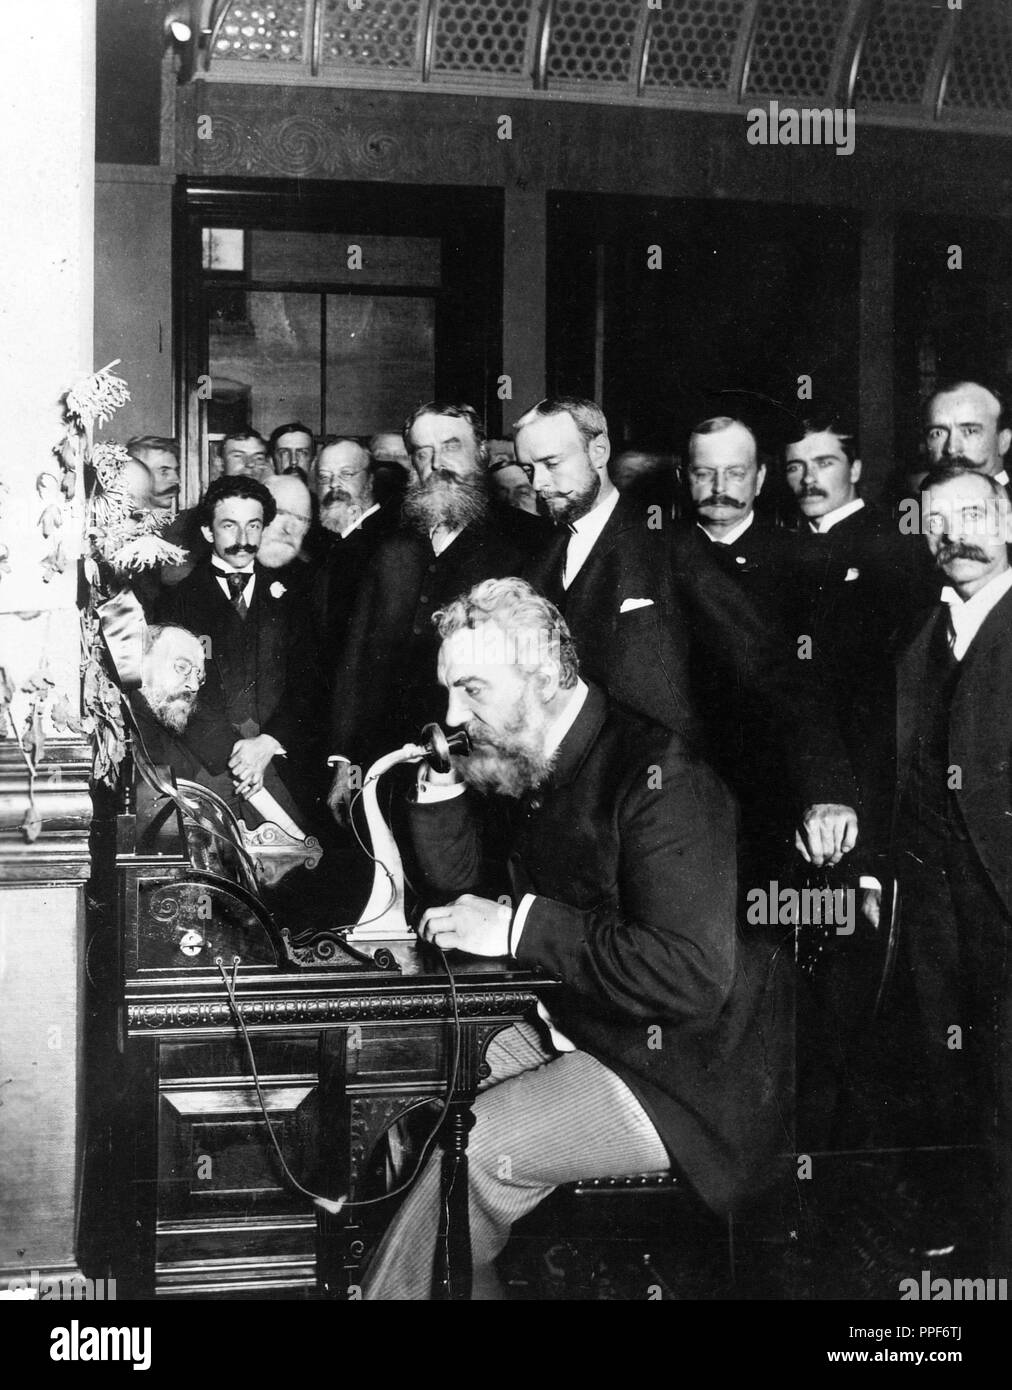 Alexander Graham Bell at the opening of the New York-Chicago line, 1892. Author: ANONYMOUS. Stock Photo